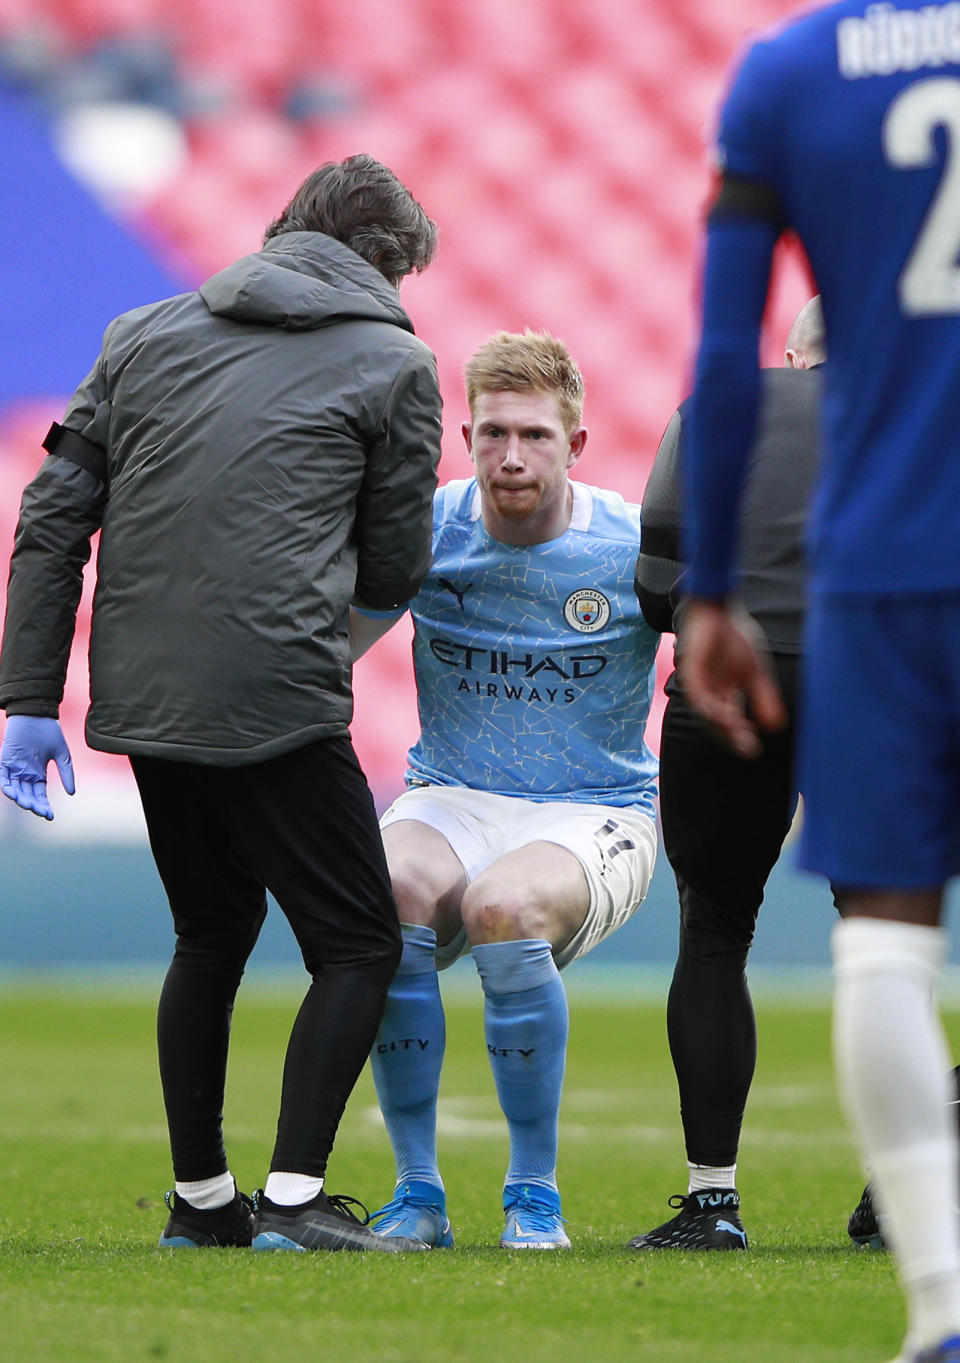 Manchester City's Kevin De Bruyne stands up helped by medical staff after injuring during the English FA Cup semifinal soccer match between Chelsea and Manchester City at Wembley Stadium in London, England, Saturday, April 17, 2021. (AP Photo/Ian Walton, Pool)